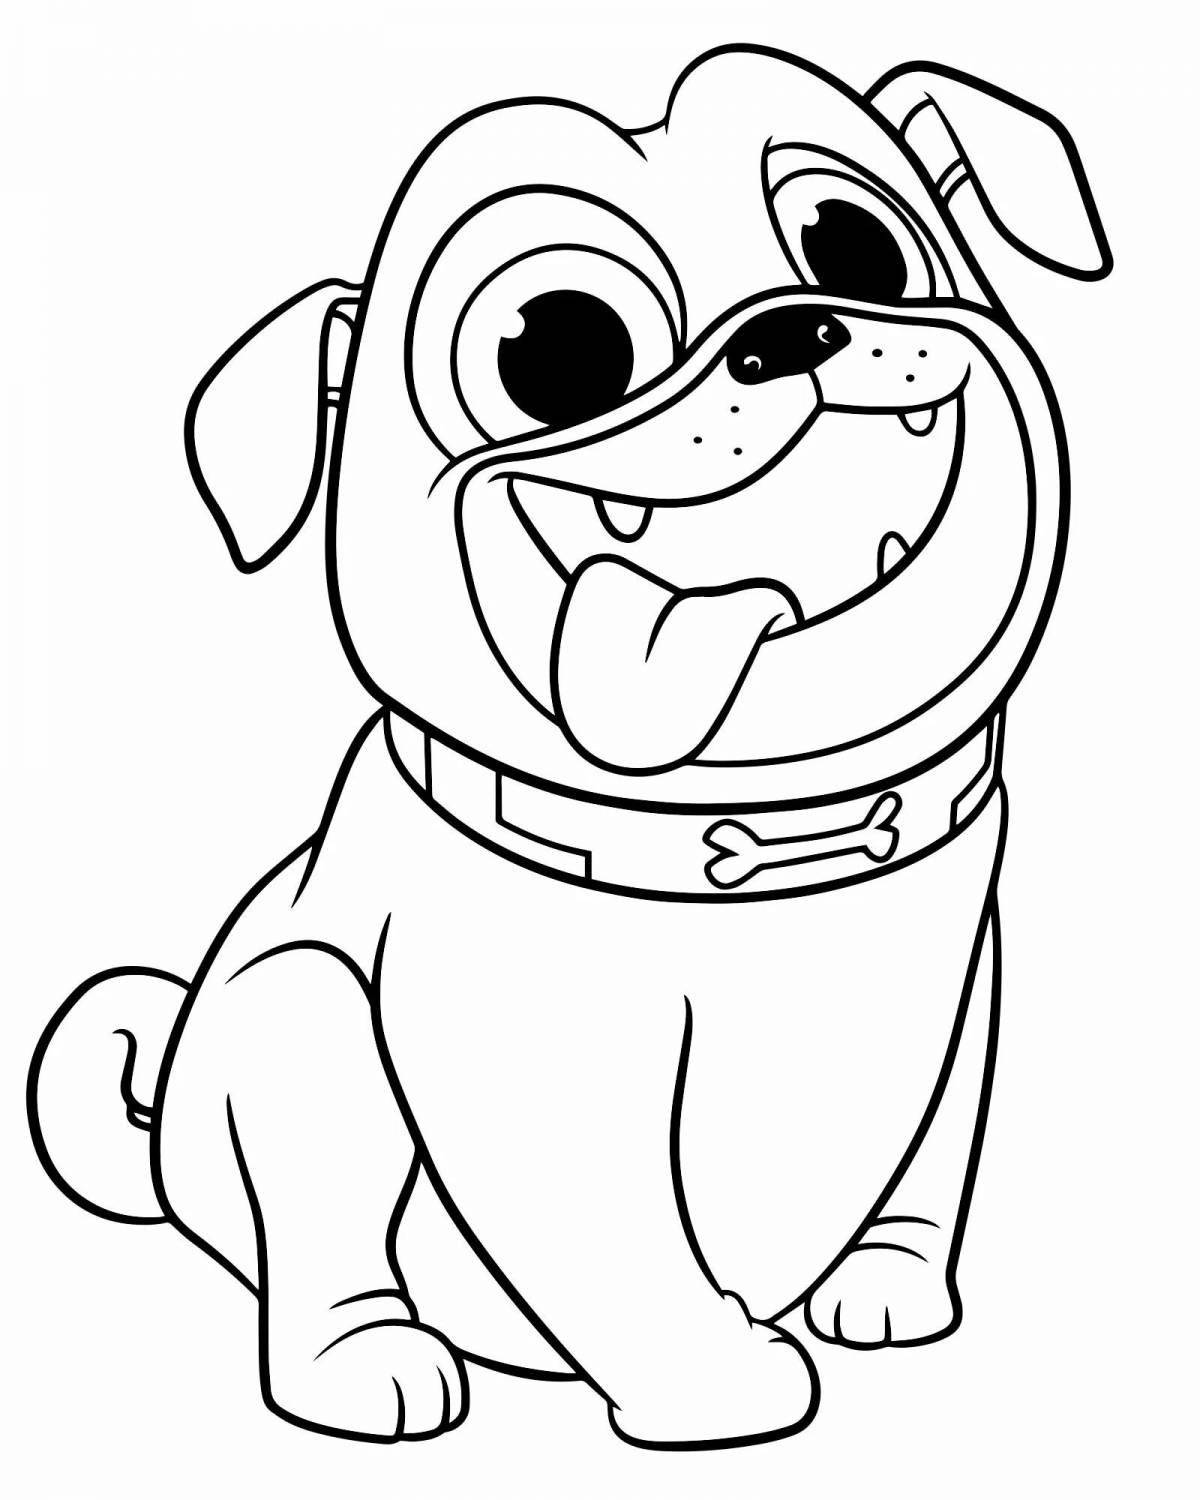 Curious dog coloring pages for boys